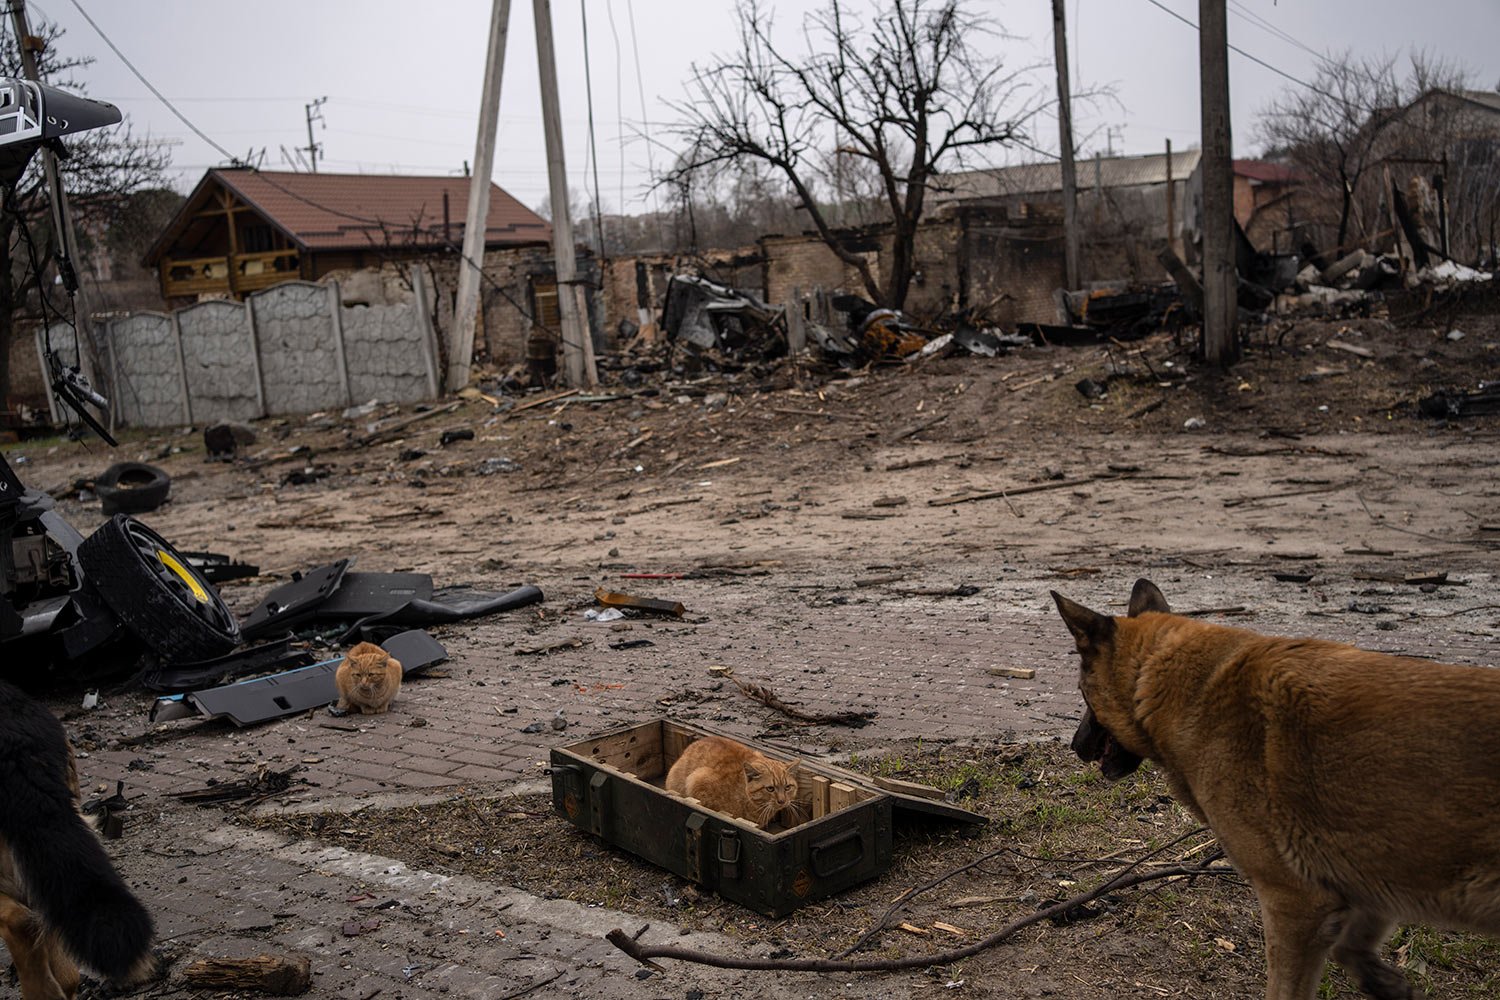  A cat sits in a box where ammunitions are kept, in Bucha, on the outskirts of Kyiv, Ukraine, Tuesday, April 5, 2022. (AP Photo/Rodrigo Abd) 